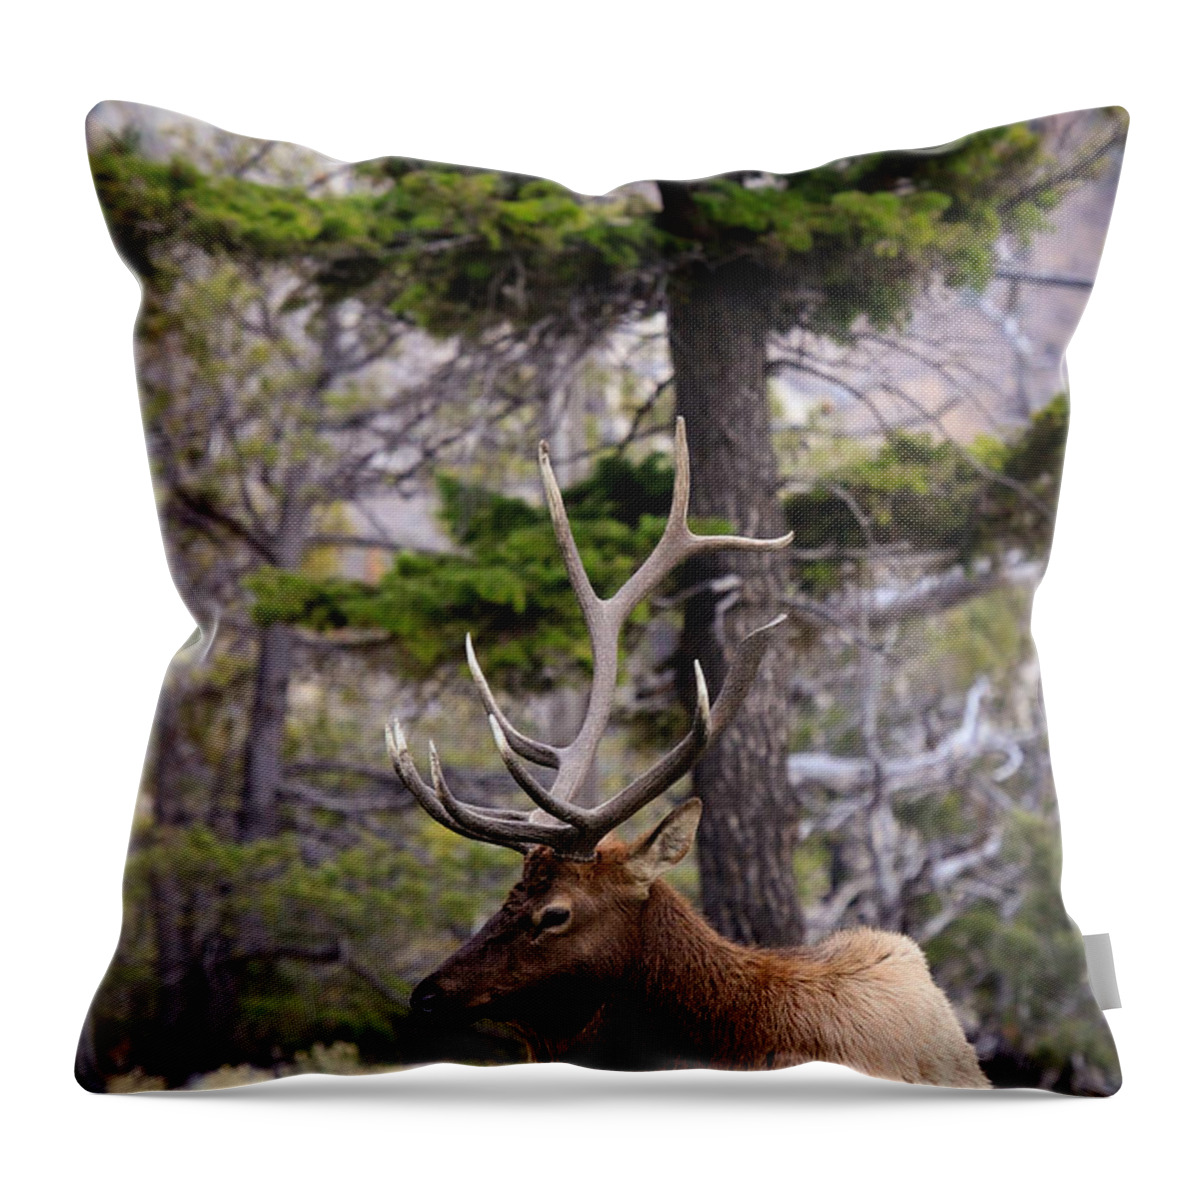 Bull Elk Throw Pillow featuring the photograph On The Grass by Steve McKinzie